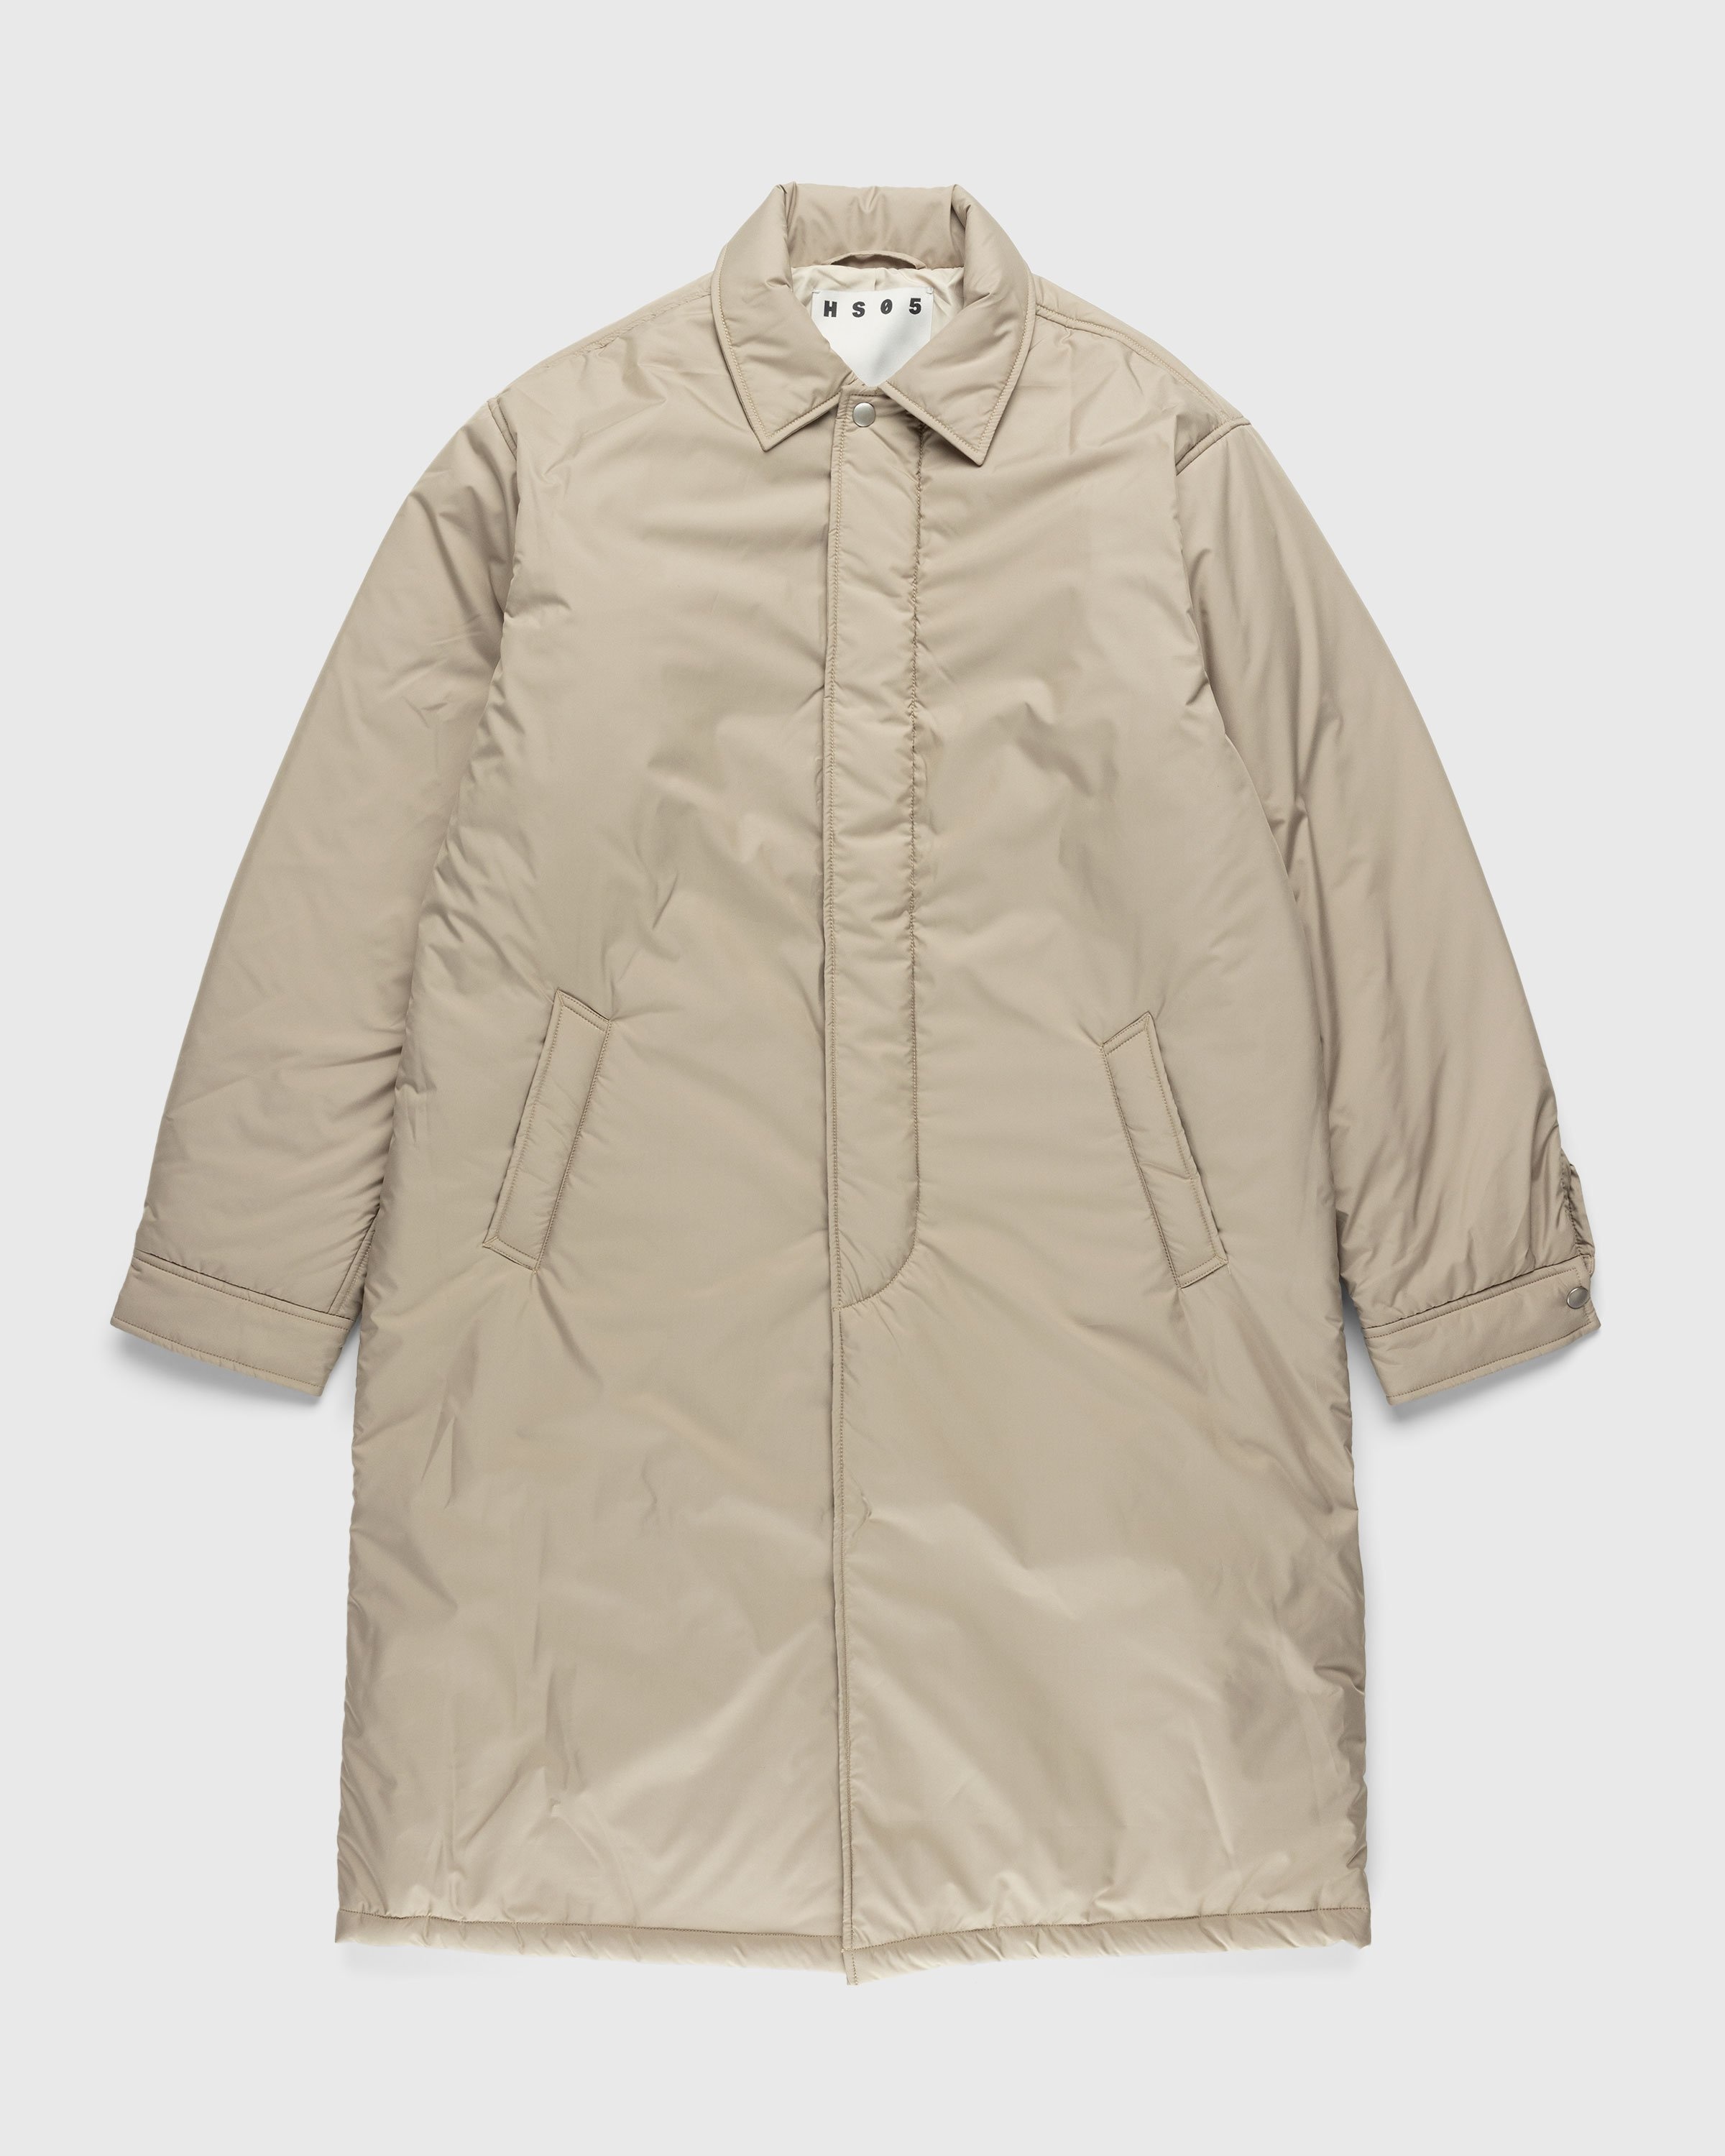 Highsnobiety HS05 – Light Insulated Eco-Poly Trench Coat Beige - Outerwear - Beige - Image 1